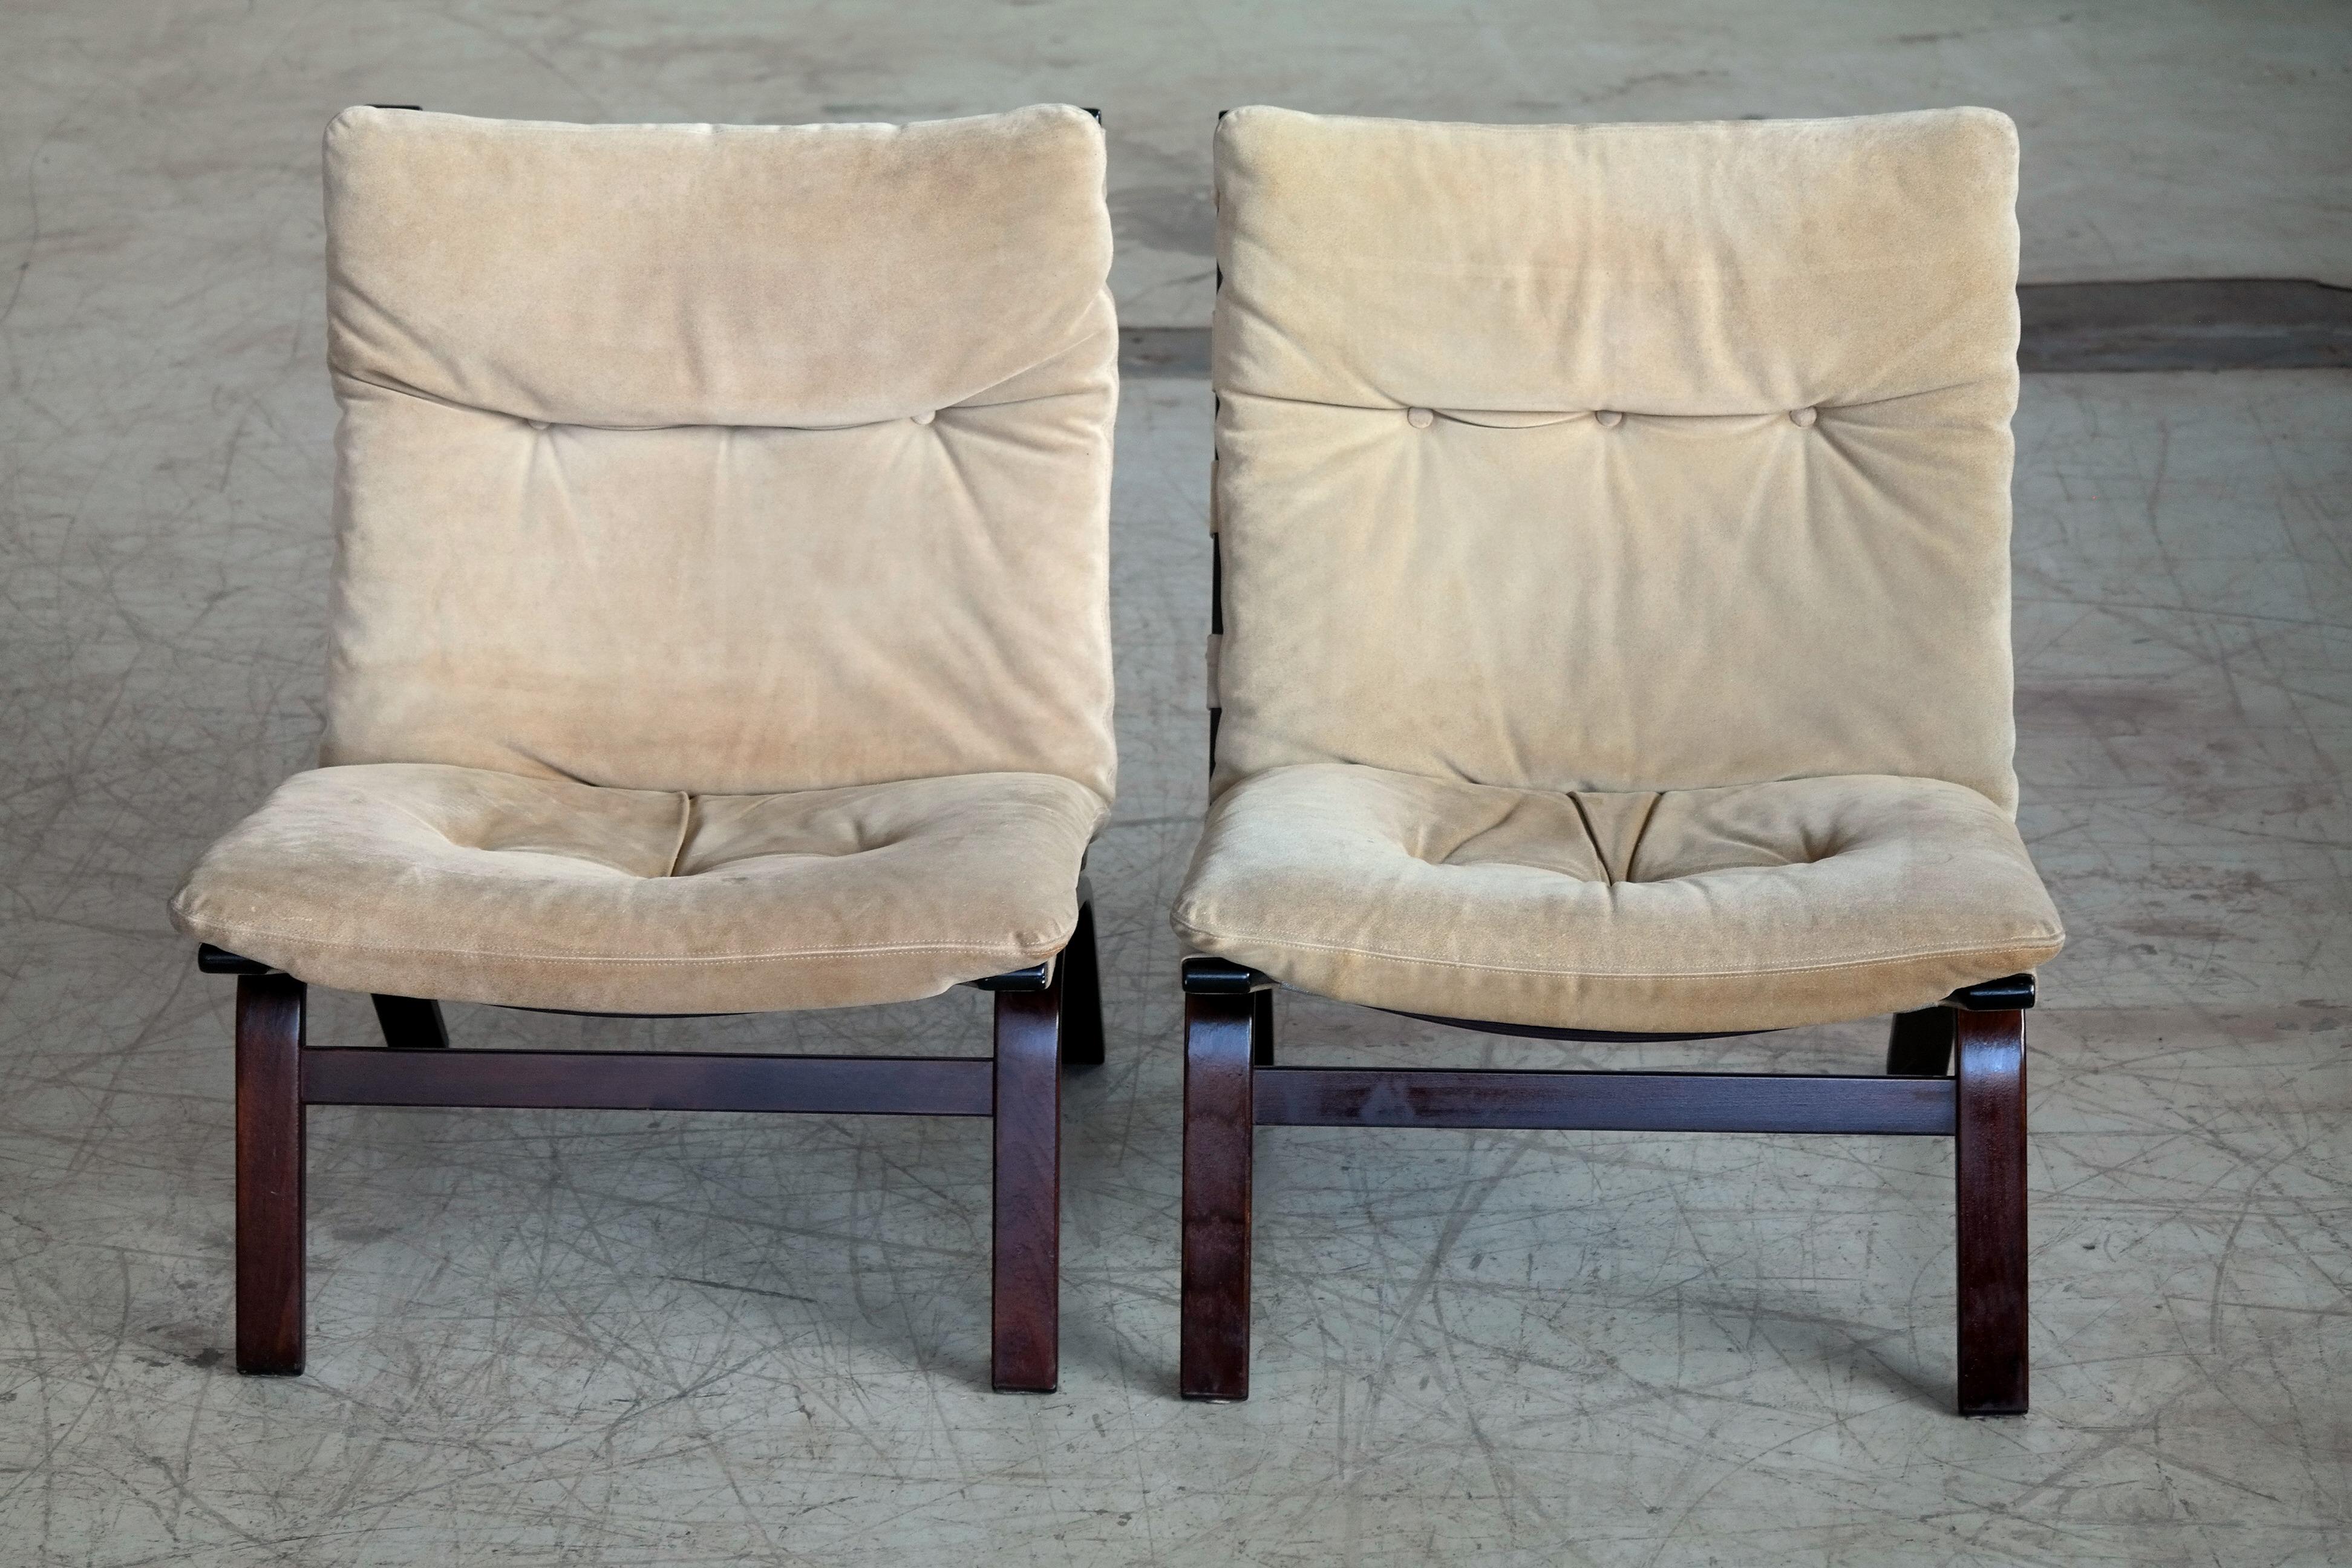 Beautiful pair of easy chairs made from bent plywood in the style of Ingmar Relling's Siesta chairs. This rare pair is made by Farstrup of Denmark around 1970 and covered in a nice beige or cream colored suede. Nice vintage condition with the suede